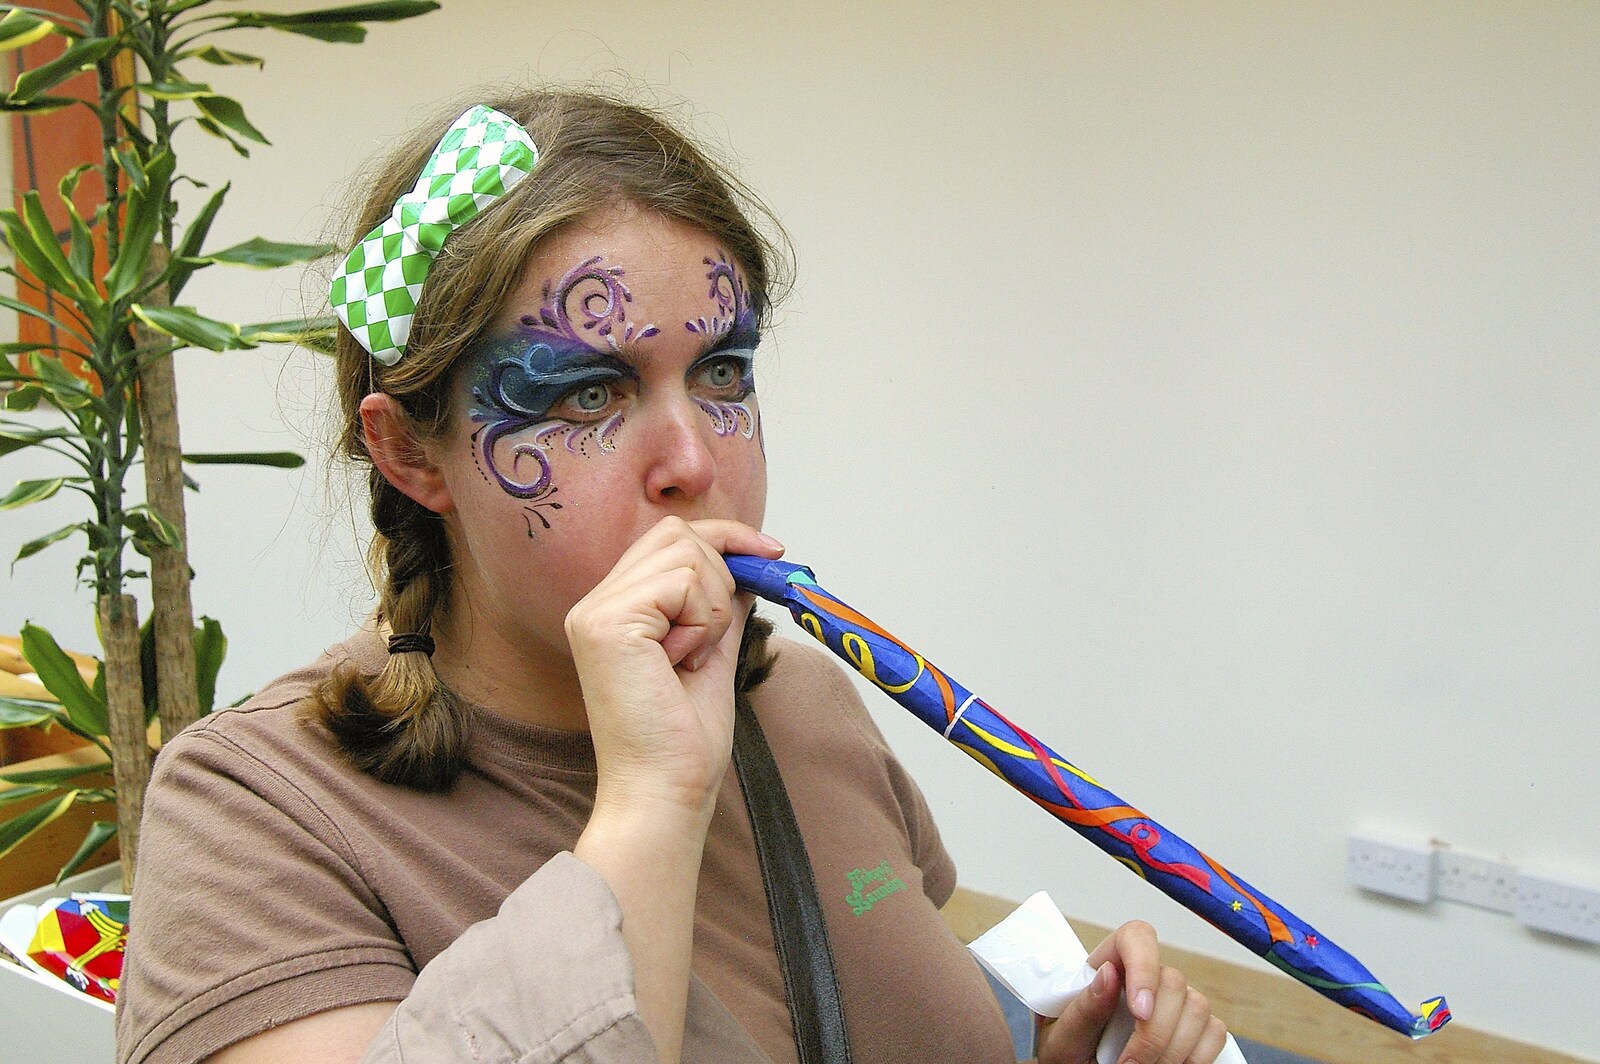 Isobel tests out a plastic bow and a party blower from Qualcomm's Summer Circus Thrash, Churchill College, Cambridge - 18th August 2006